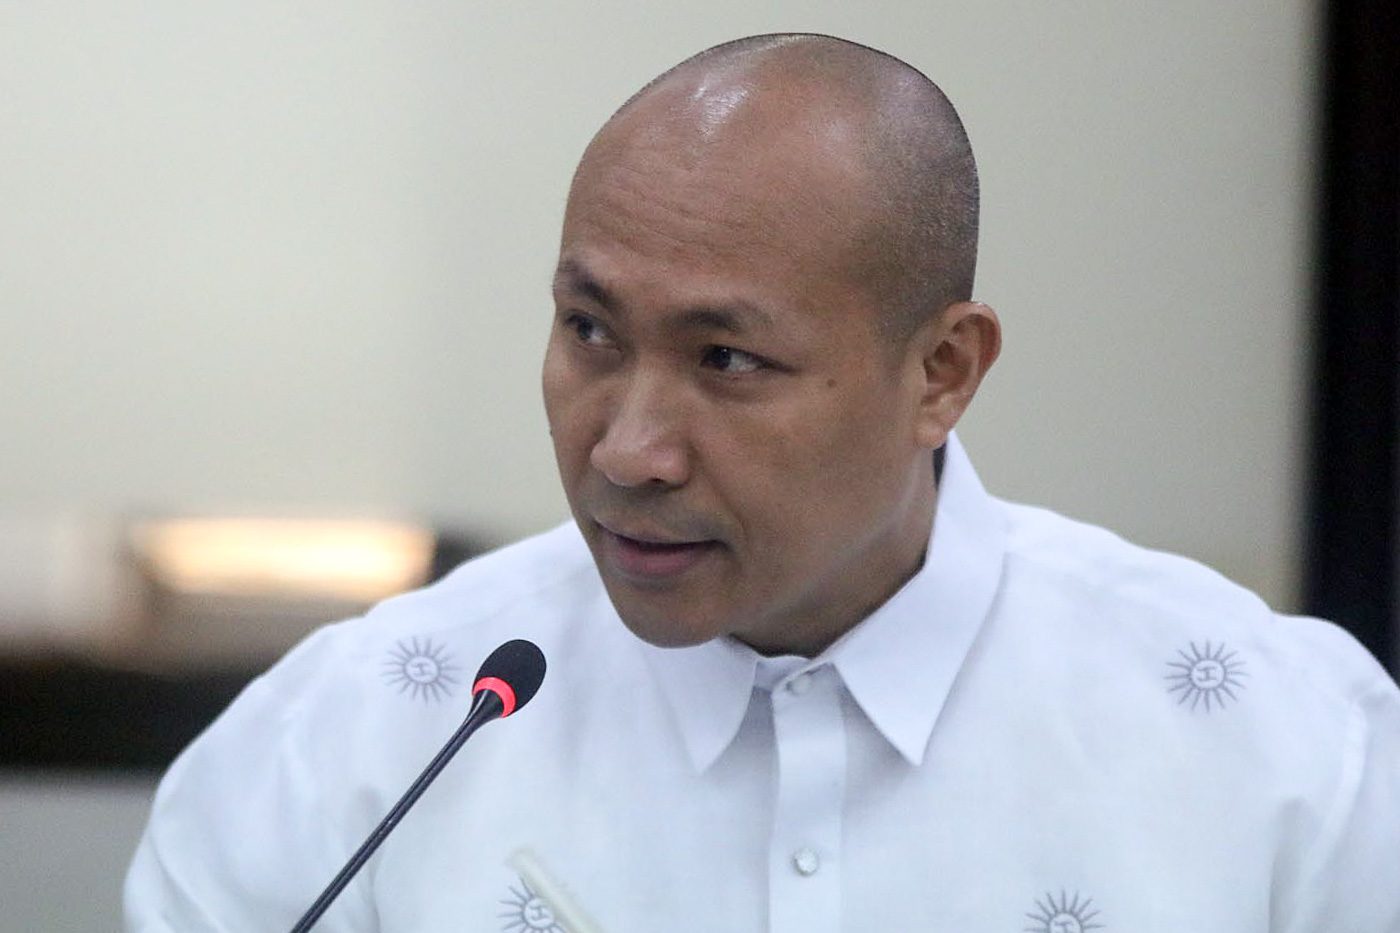 SC denial of TRO still a ‘victory’ for Trillanes, says Magdalo